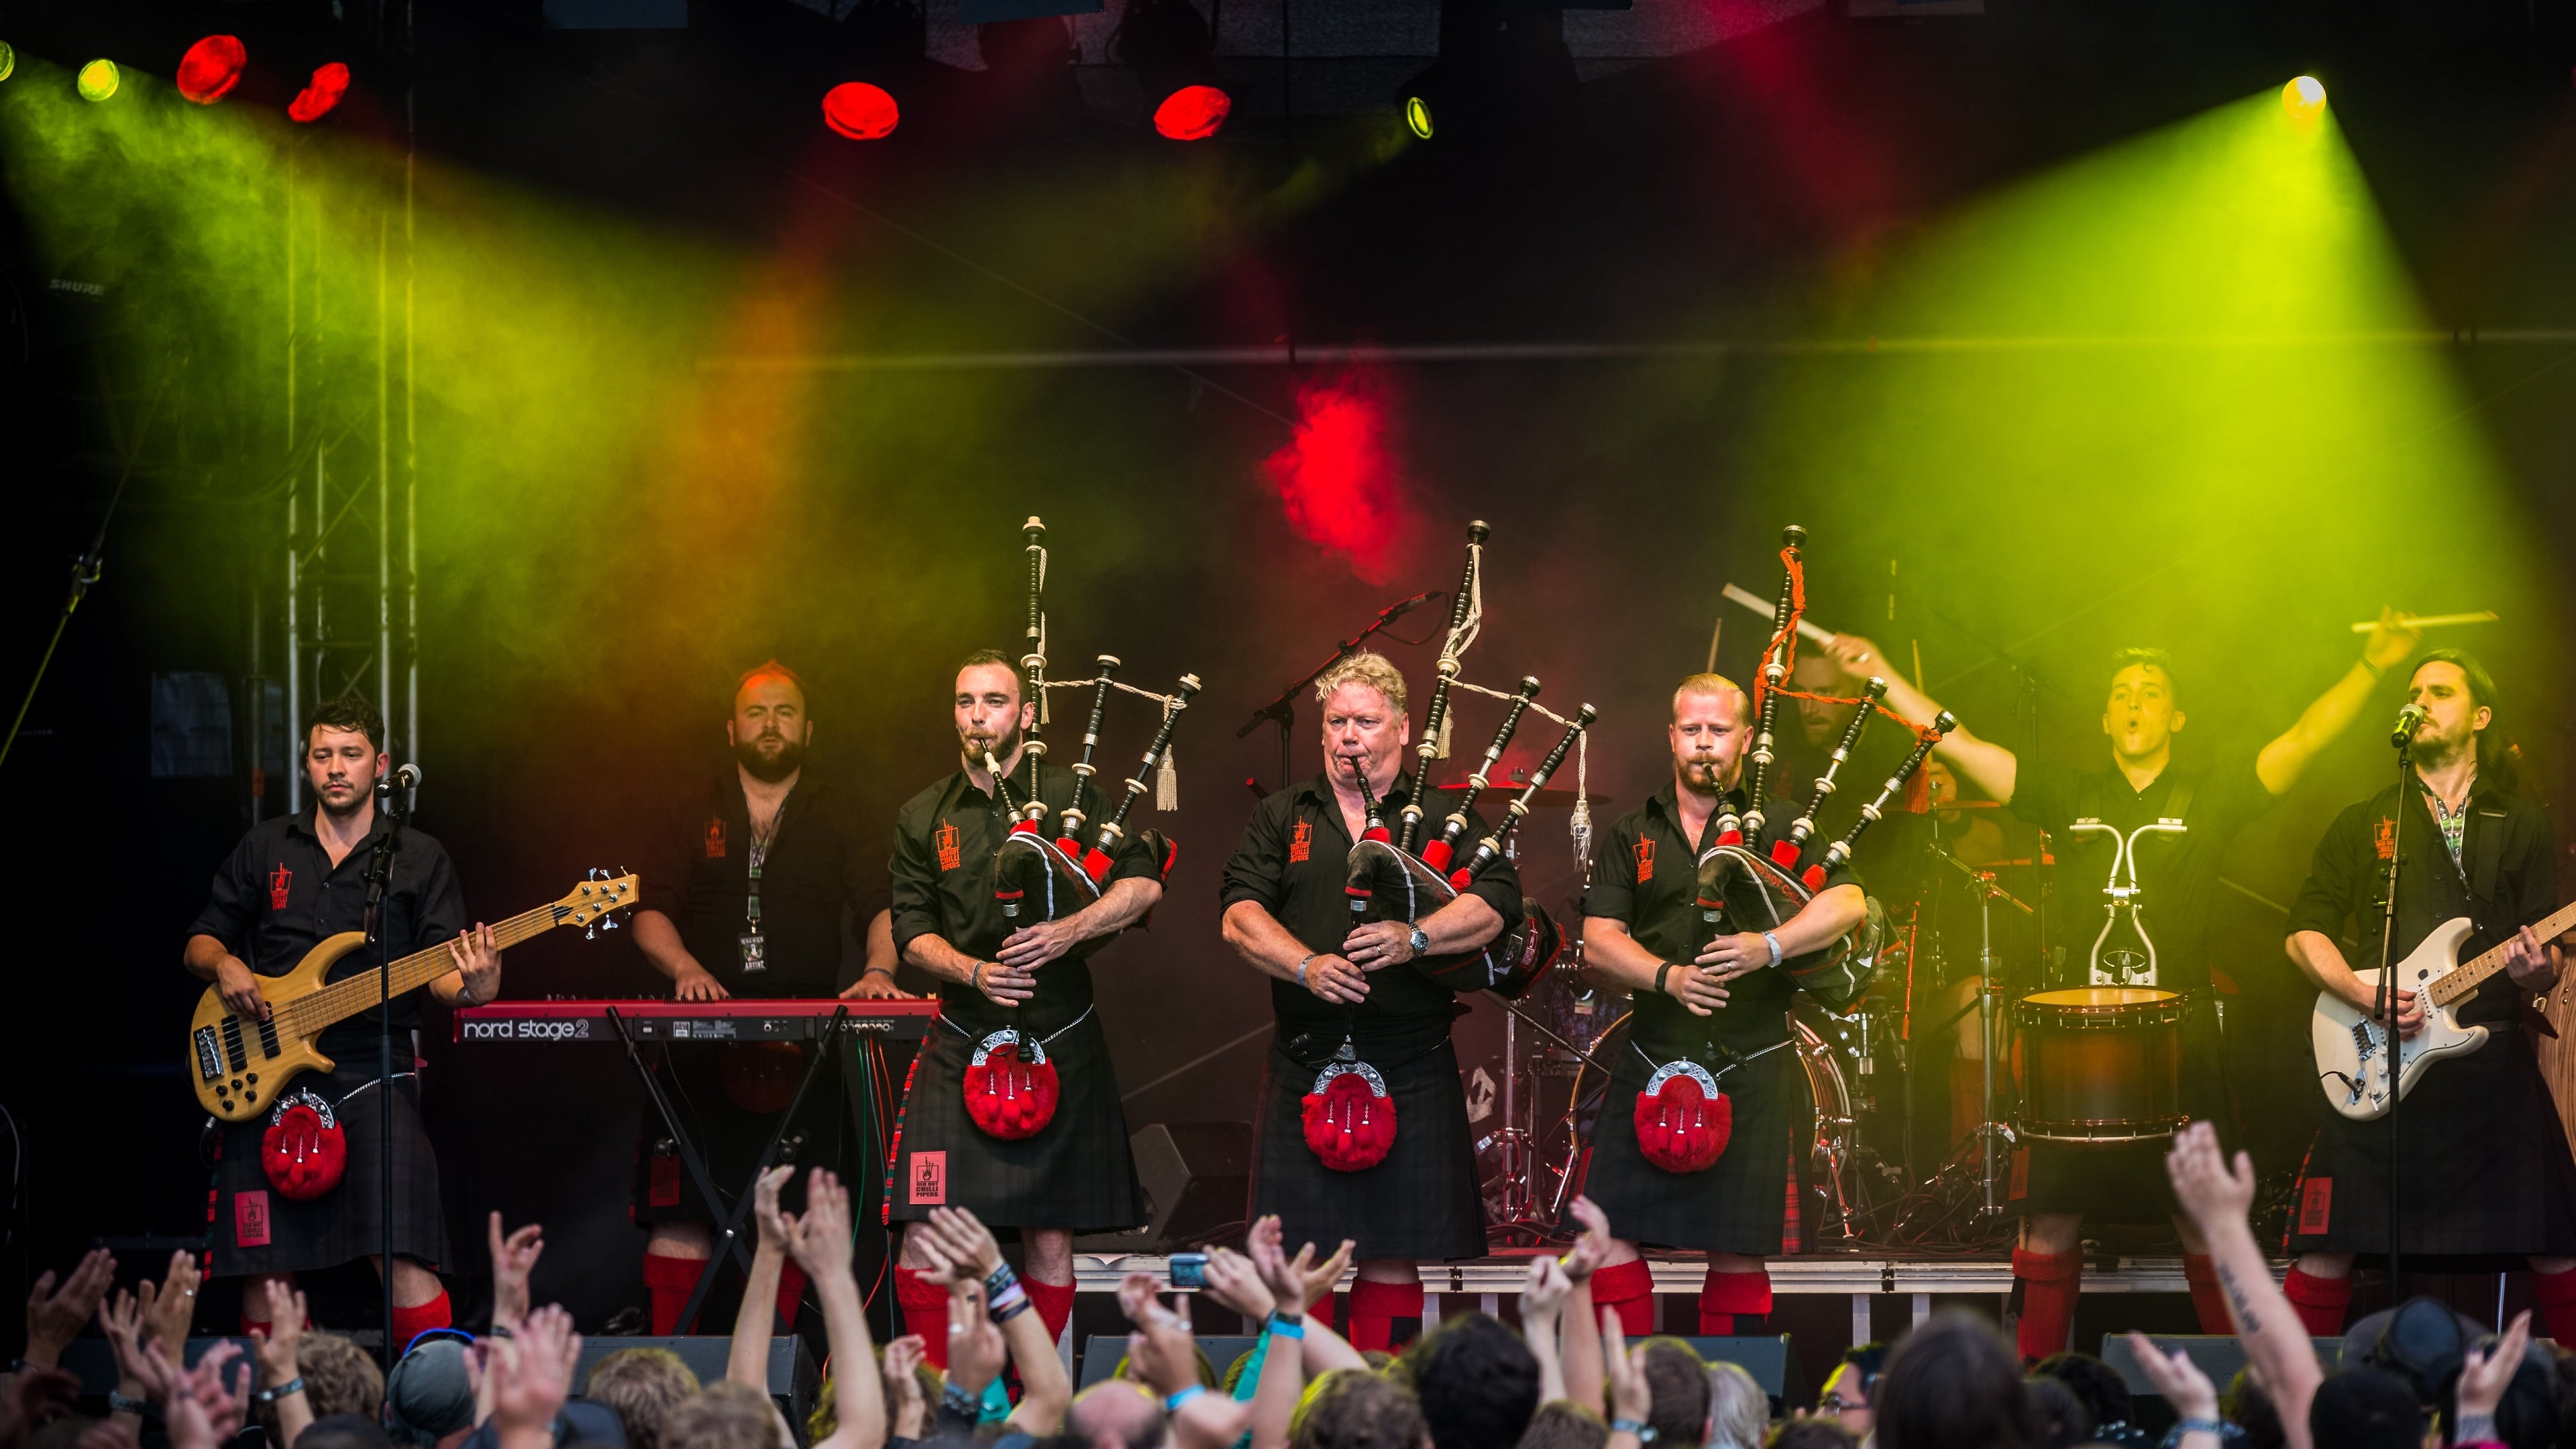 Red Hot Chilli Pipers - Blast Live